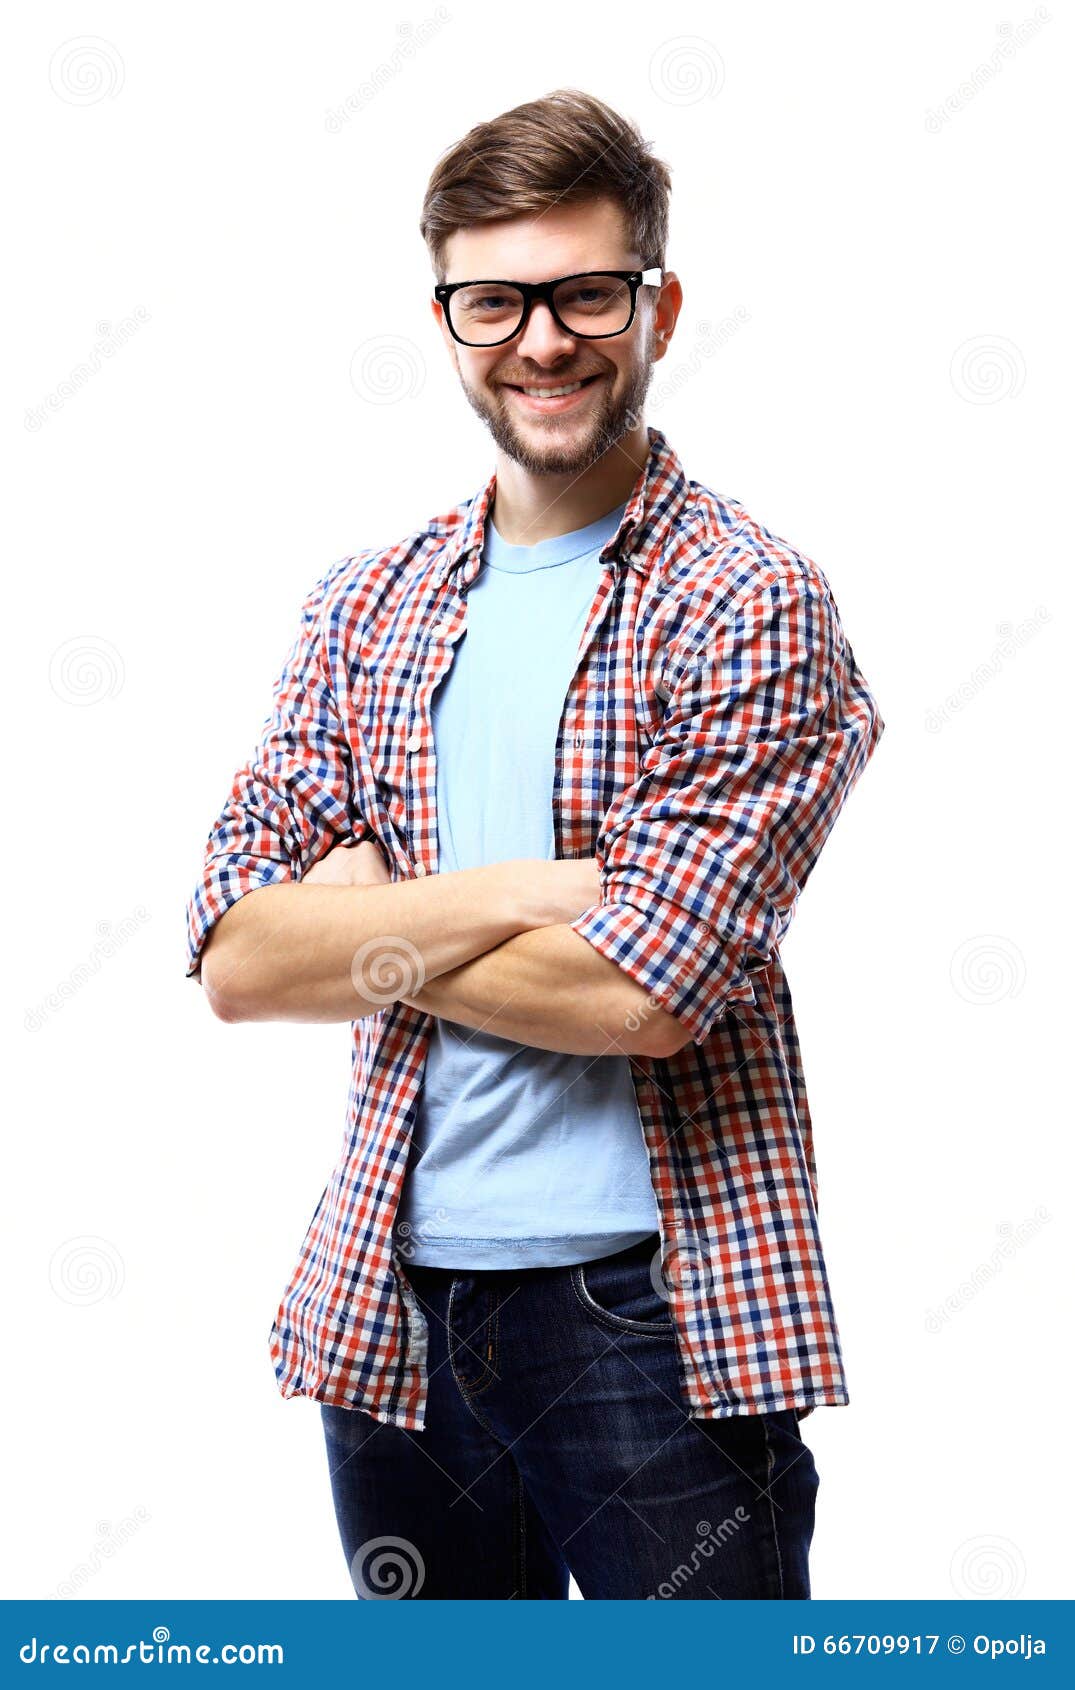 latin hipster guy wearing glasses with his arms crossed and smiling on white background